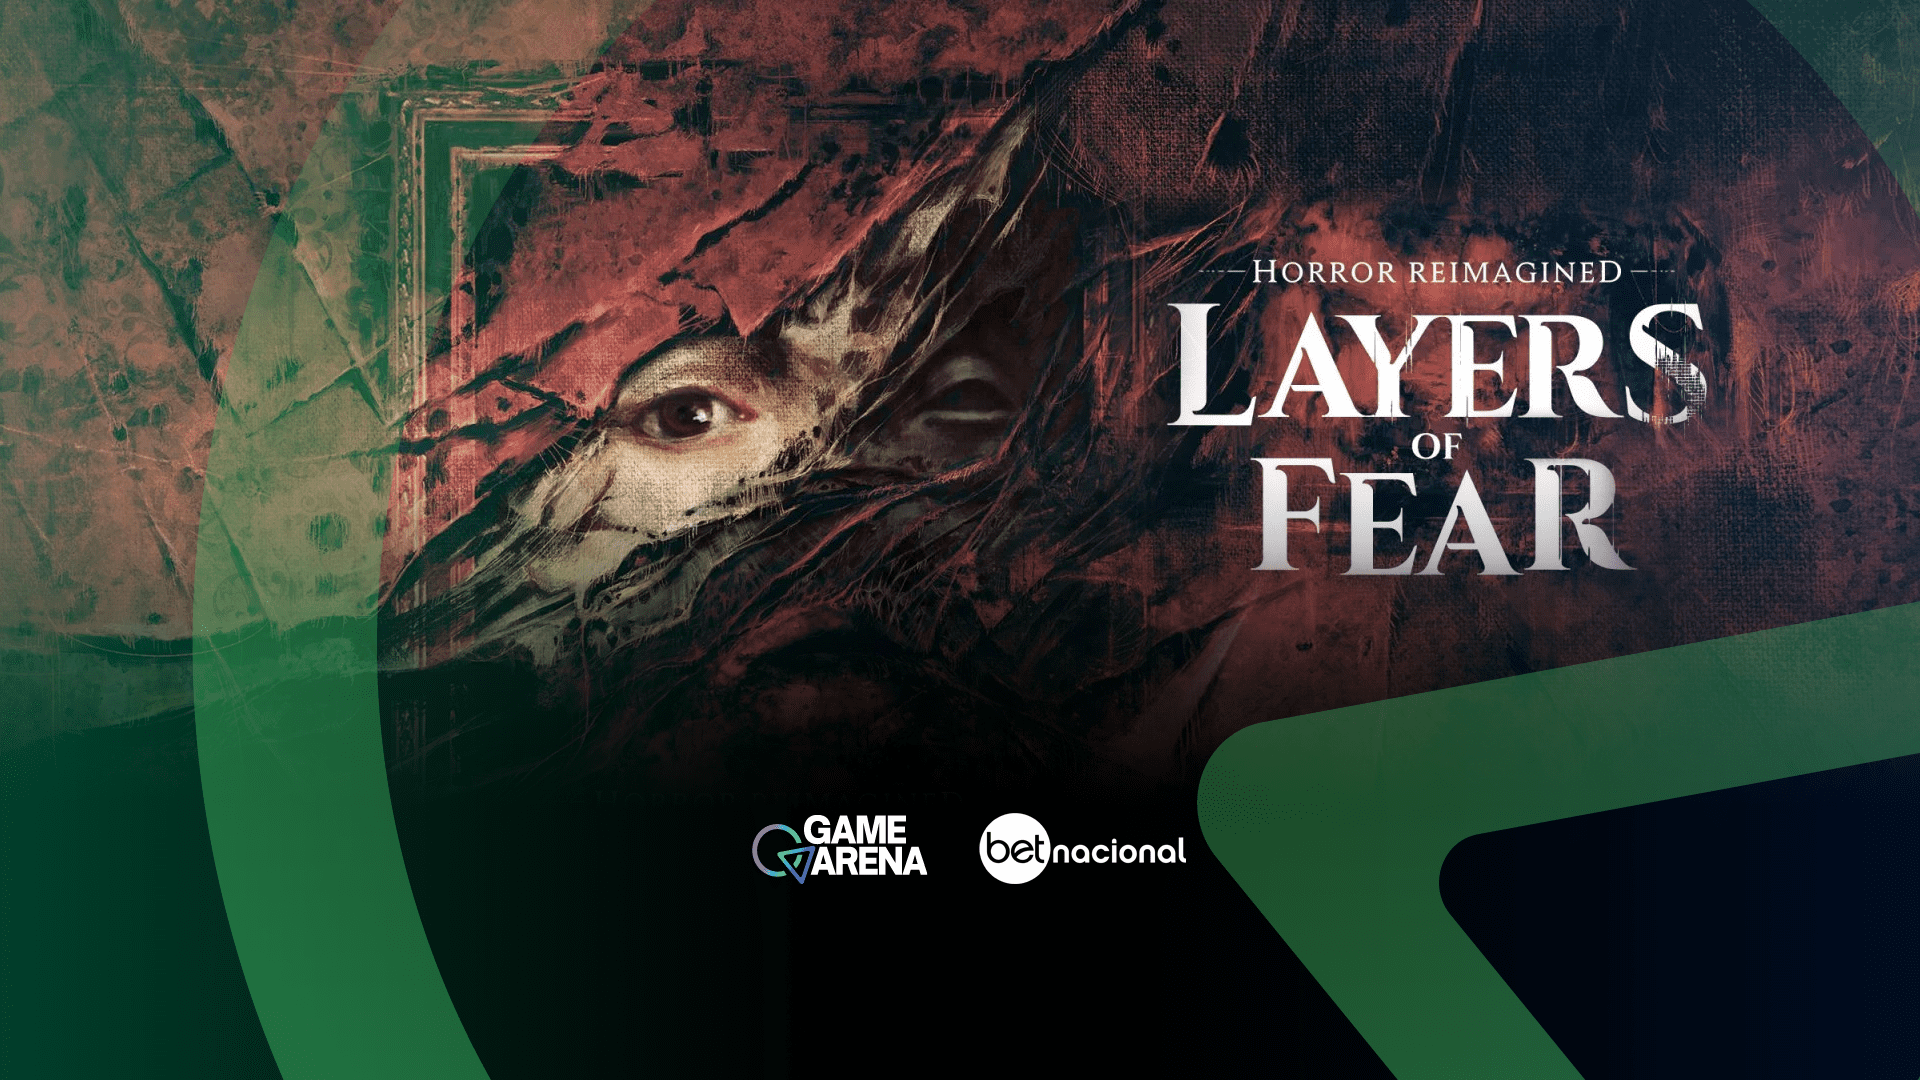 Layers of Fear Review - IGN